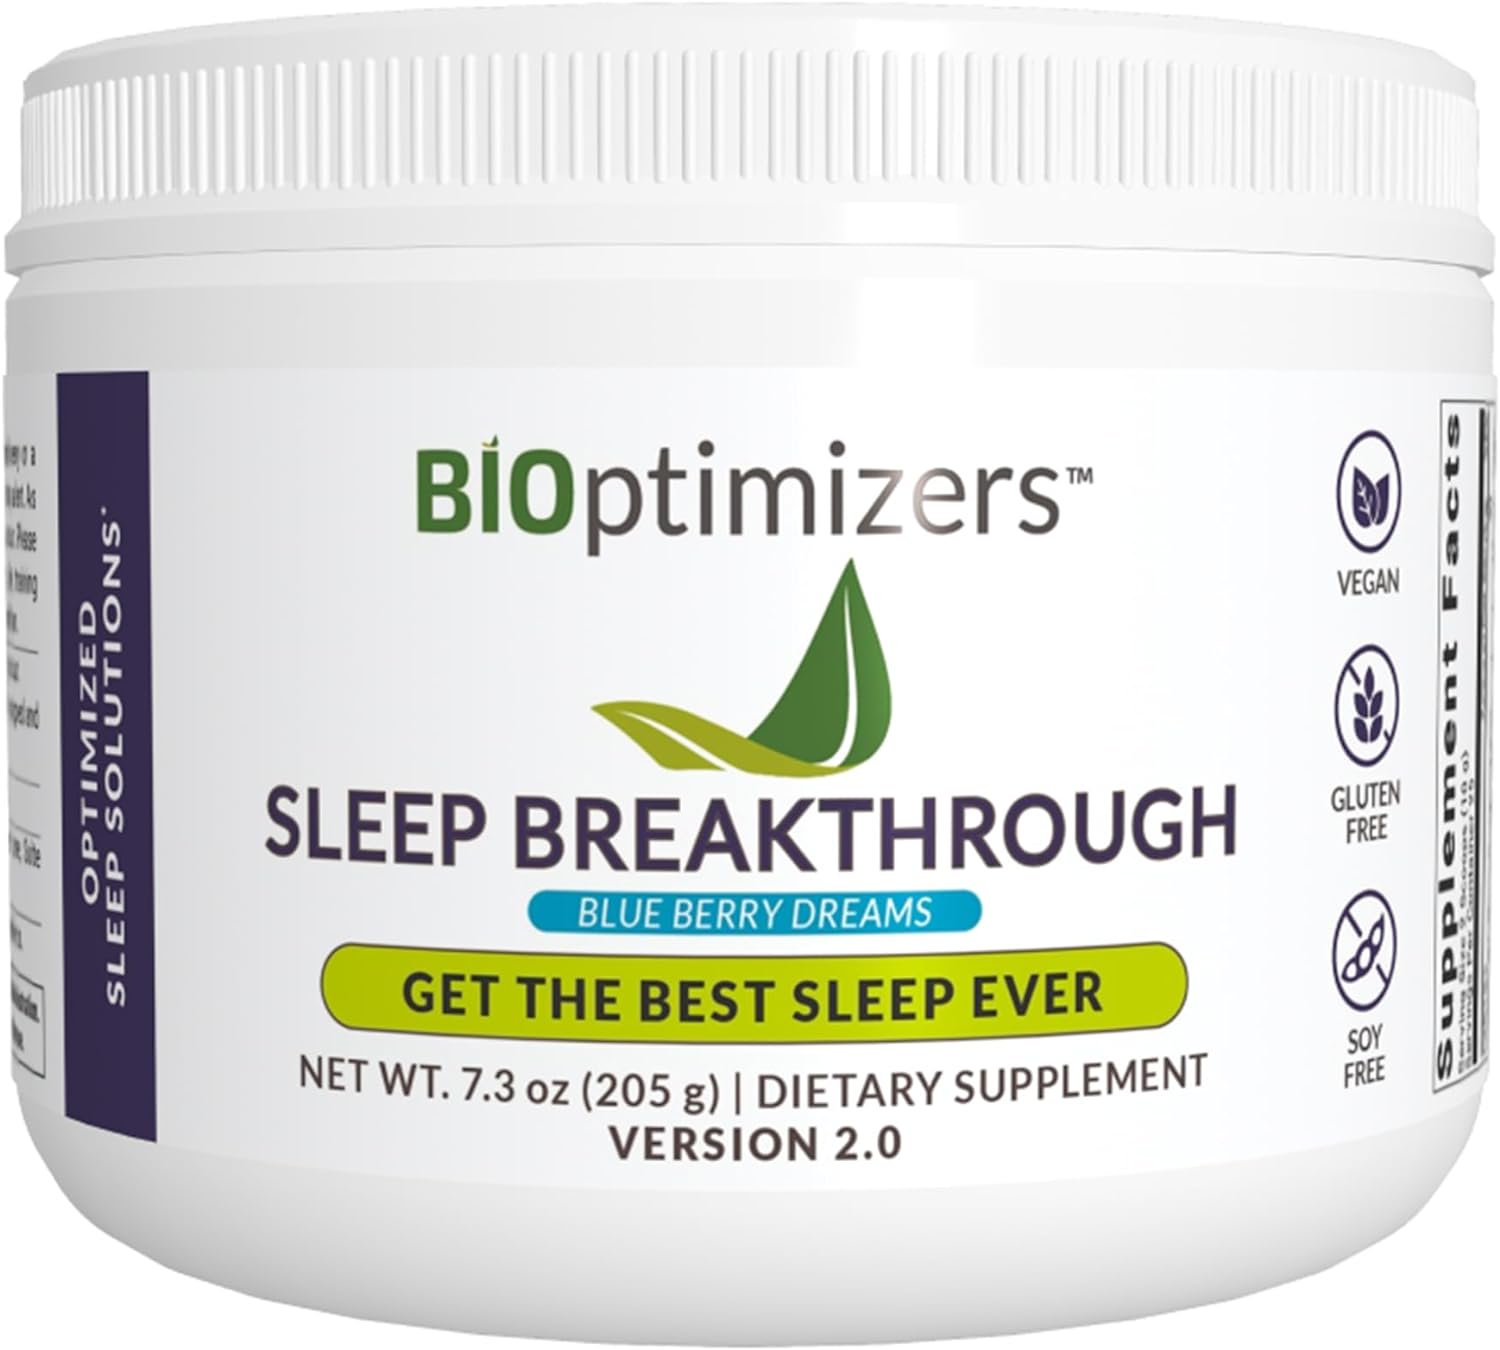 BiOptimizers Sleep Breakthrough 2.0 ? Natural Support Supplement | Calming Relief Aid Adults | Non Habit Forming | 202.5 g Powder Blue Berry Dreams